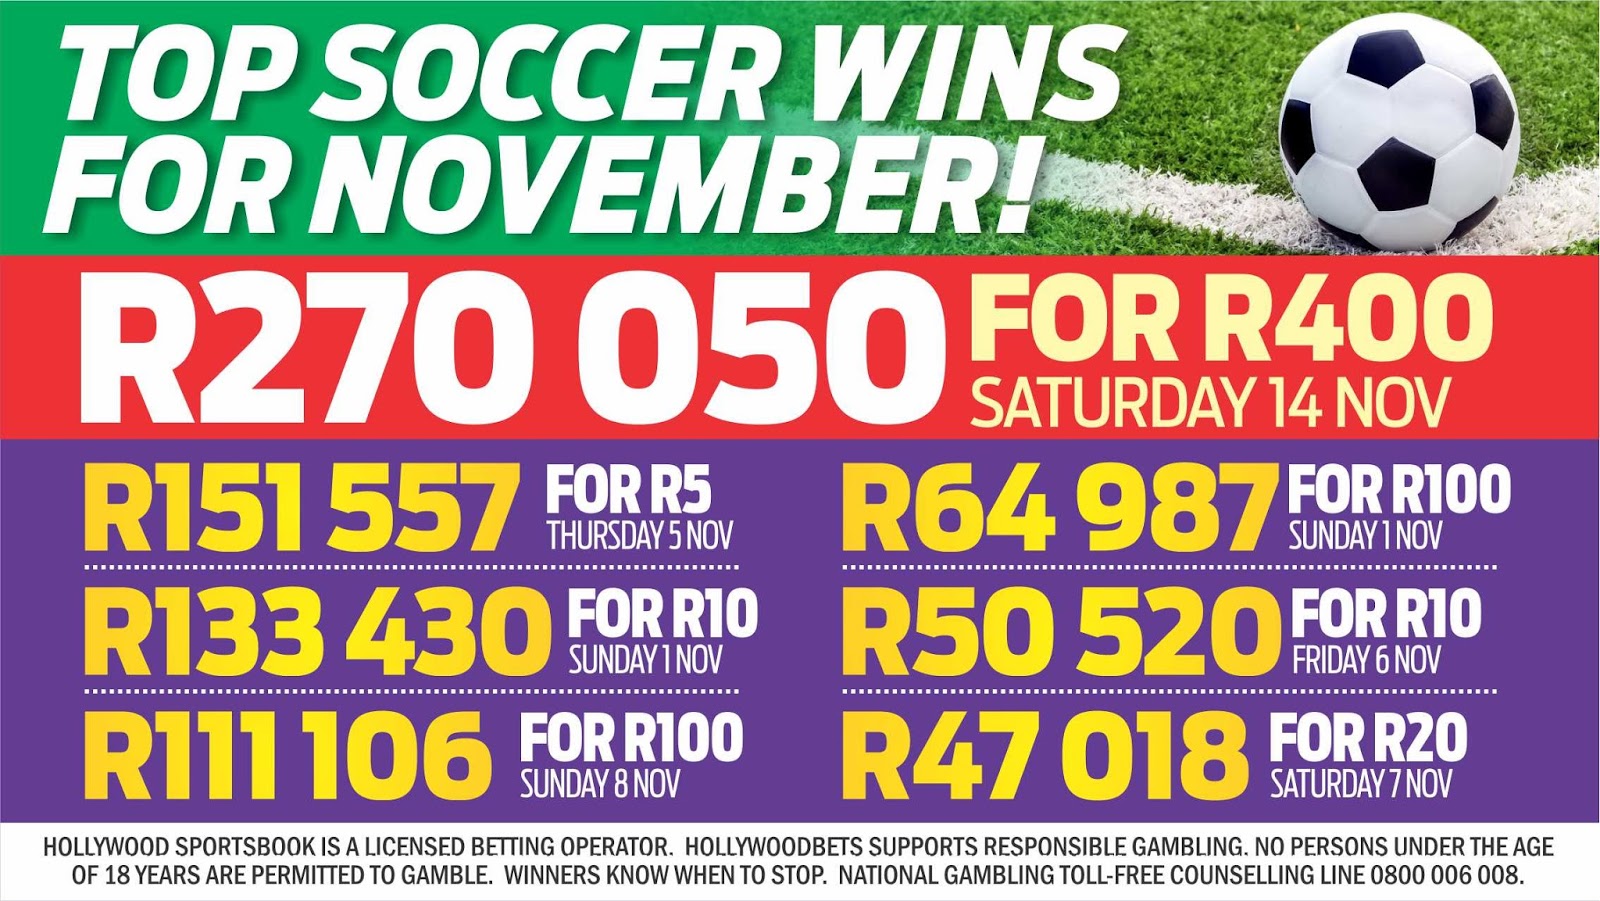 Hollywoodbets Top Soccer Wins Betting November 3